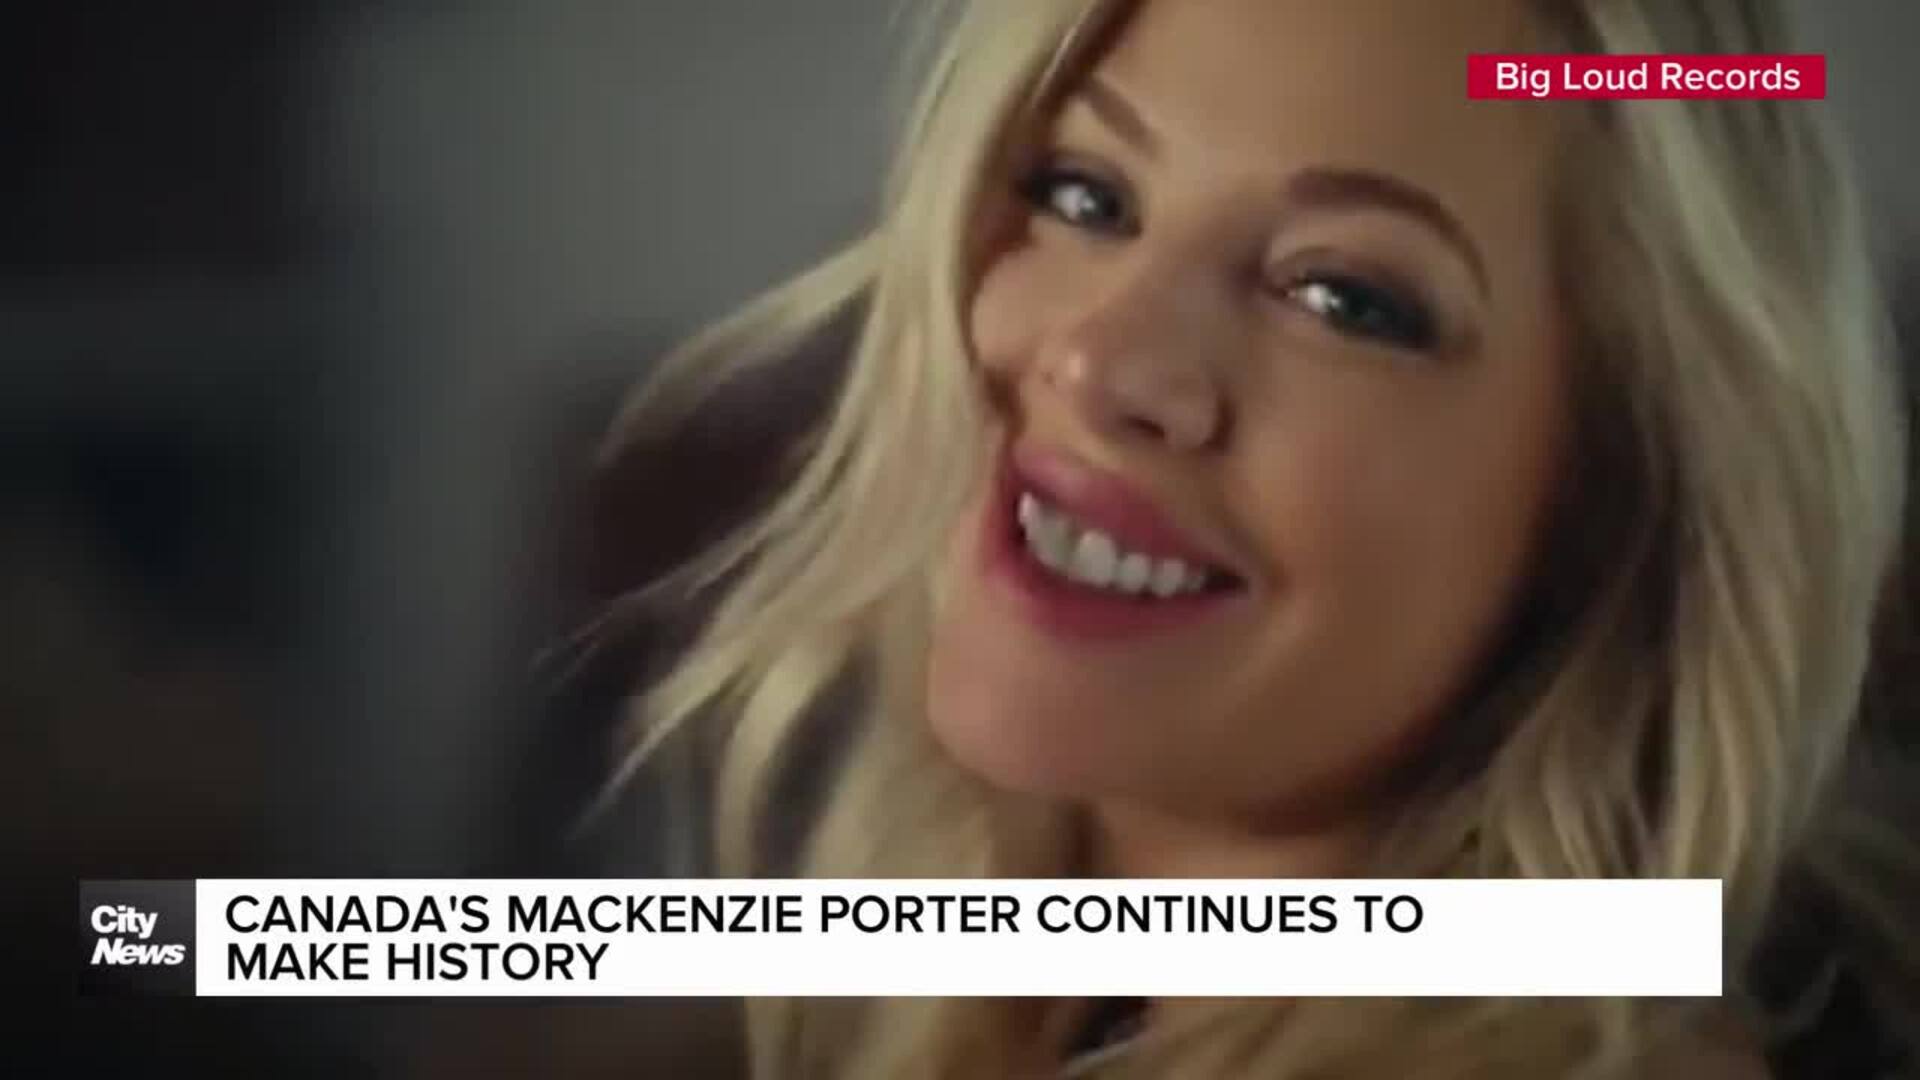 Canada's Mackenzie Porter continues to make history